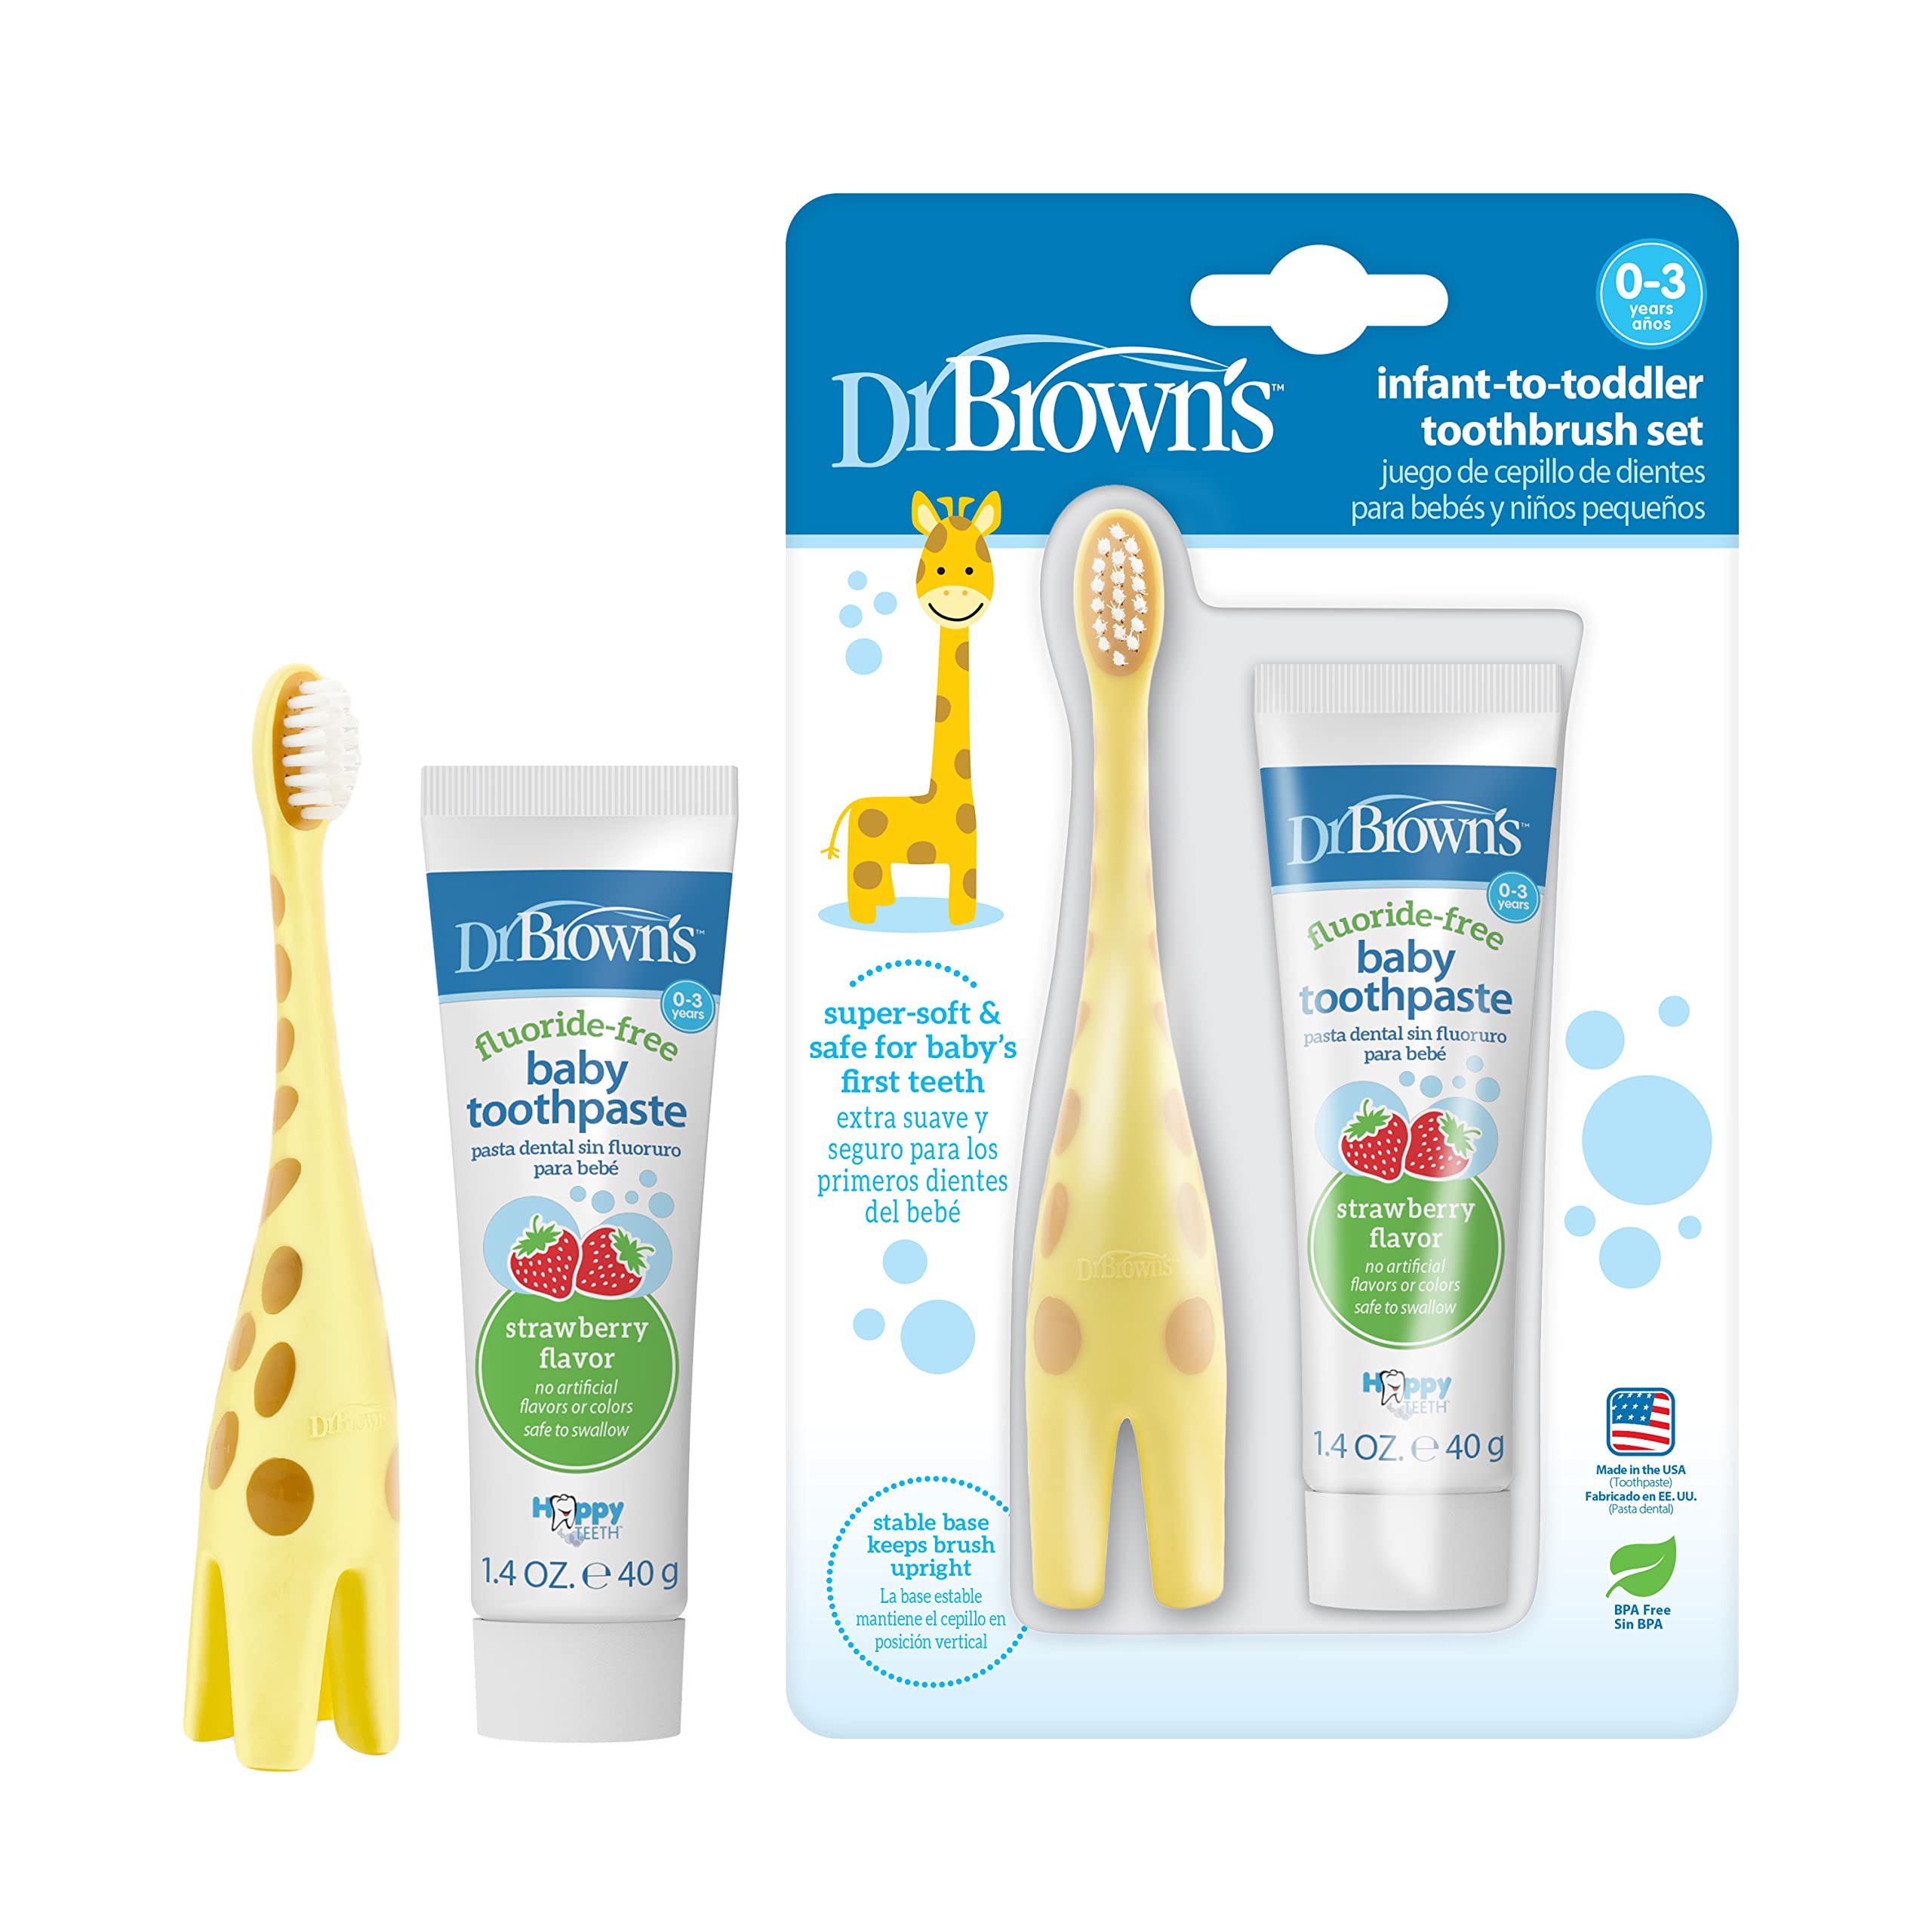 Dr. Brown’s Infant-to-Toddler Training Toothbrush Set with Fluoride-Free Baby Toothpaste, Strawberry - Giraffe - 1.4oz - 0-3 years